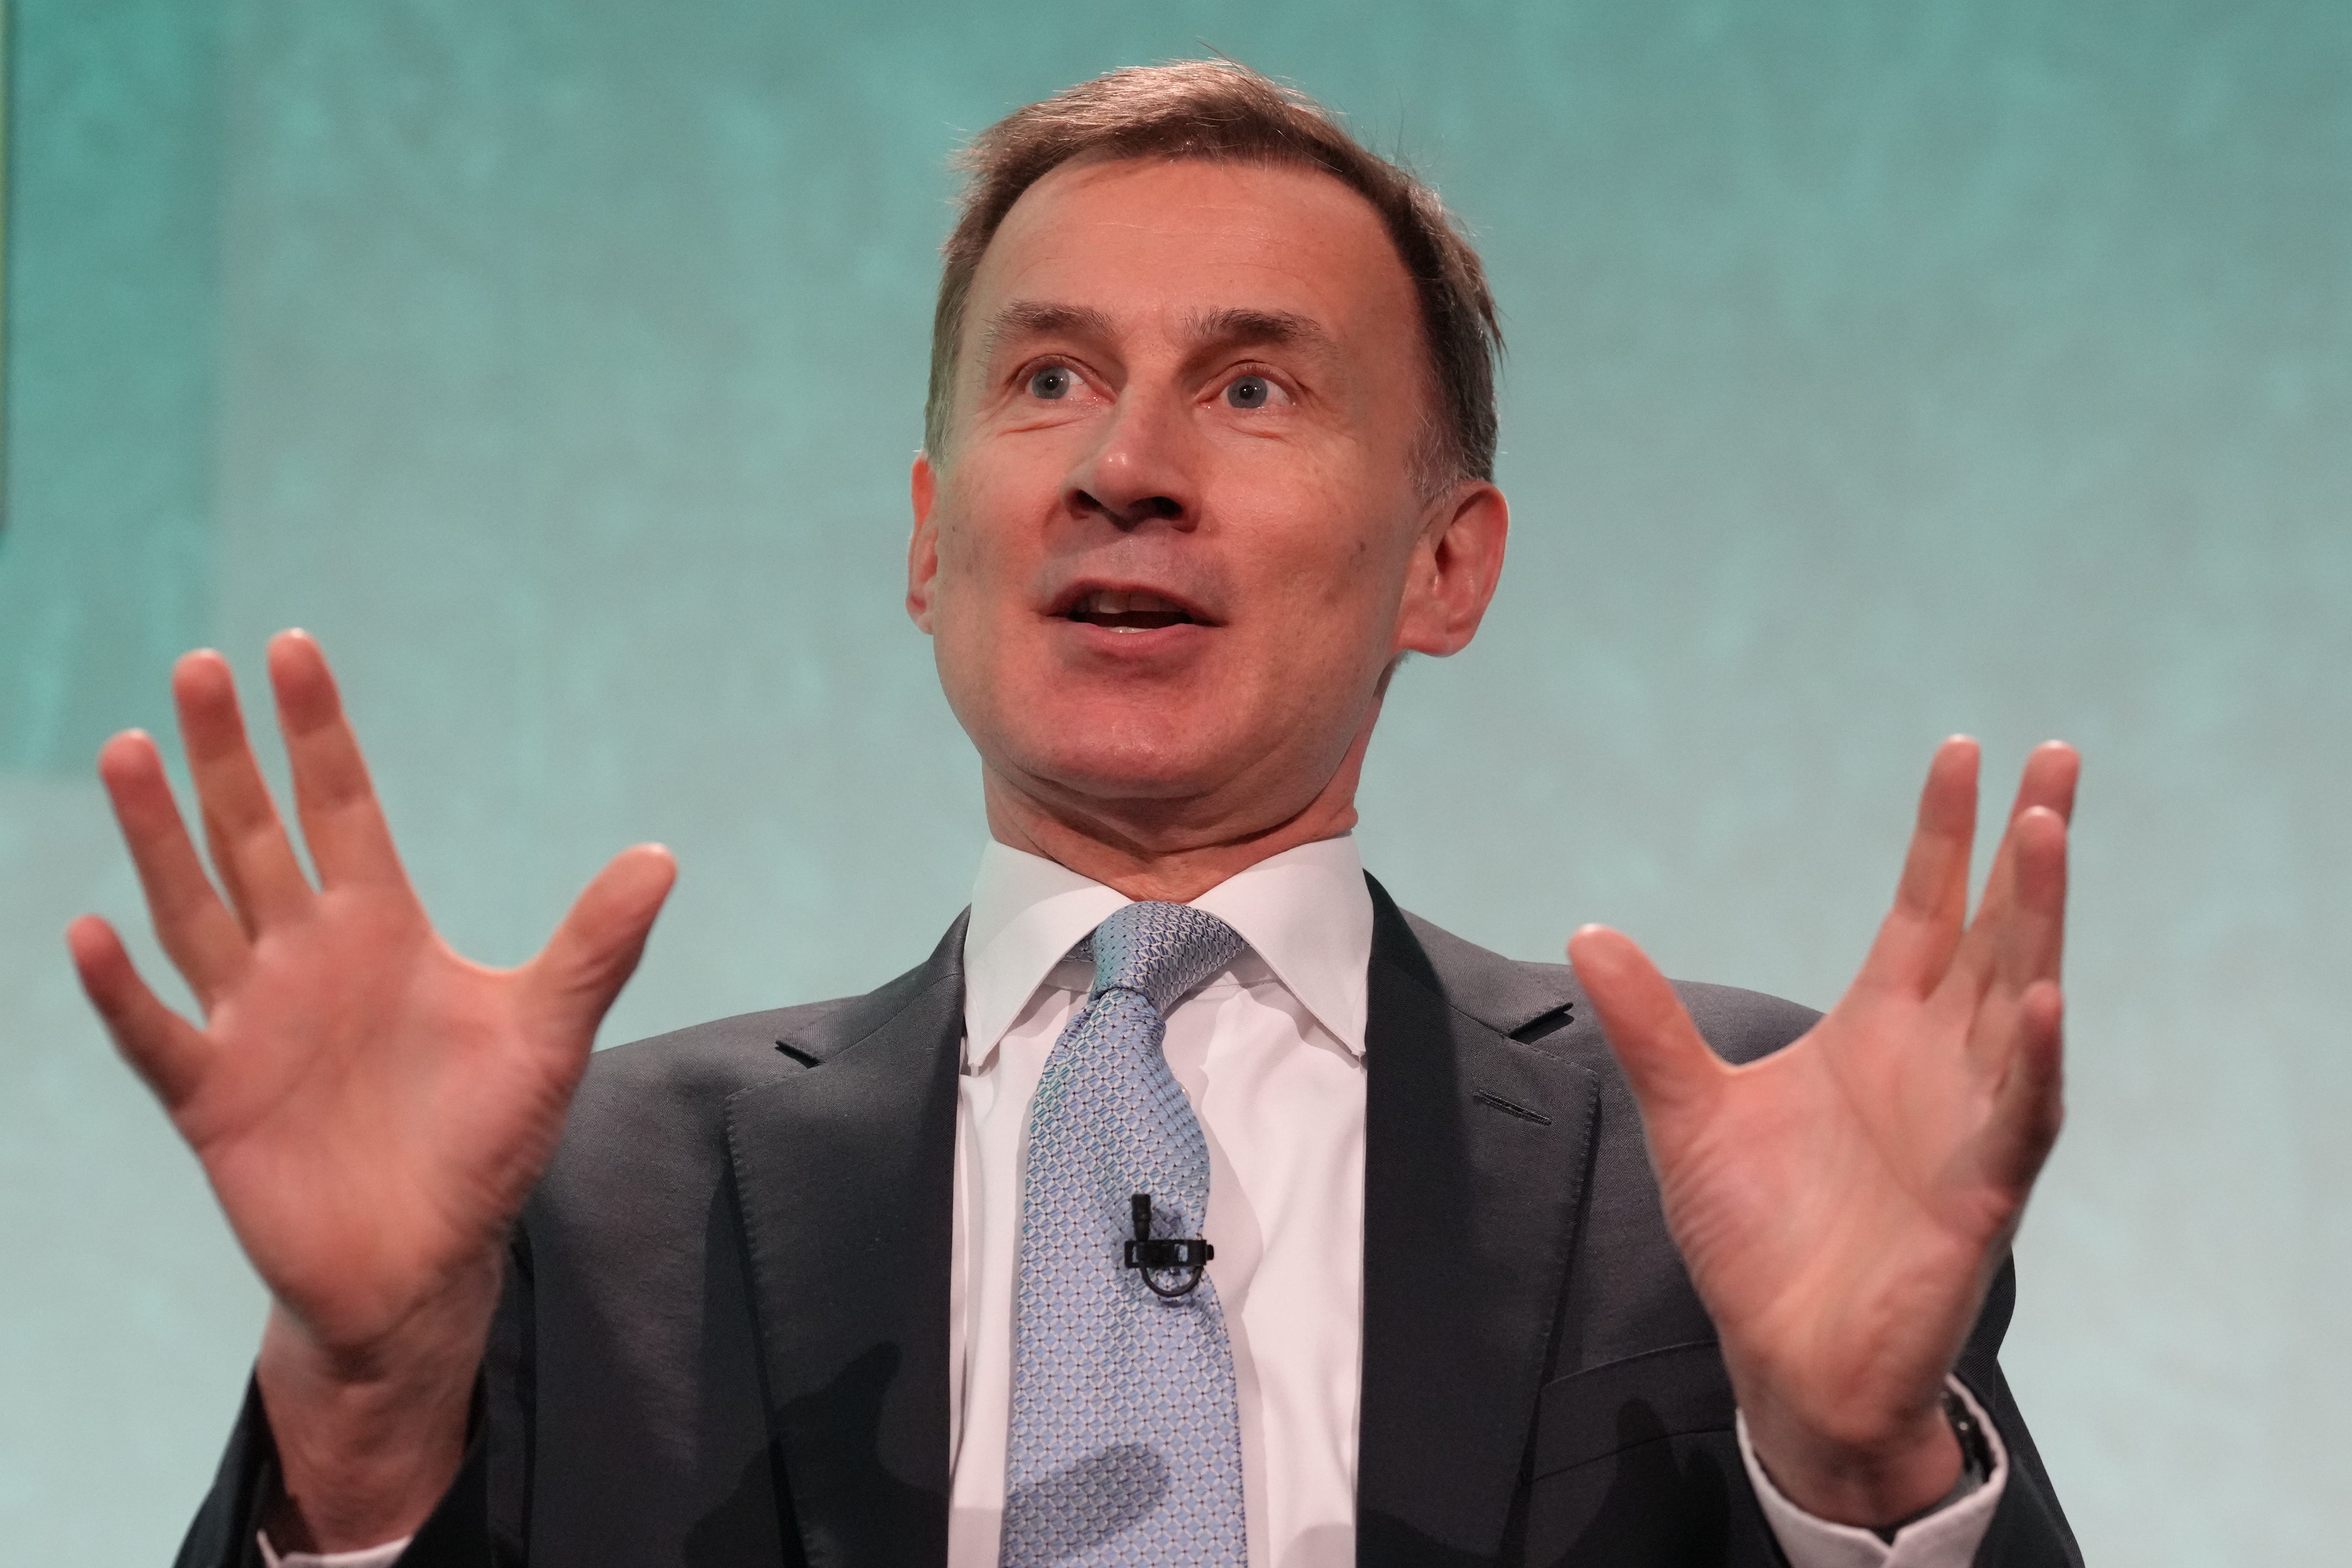 Jeremy Hunt insisted there is “light at the ed of the tunnel” if the Government sticks to its economic plan.